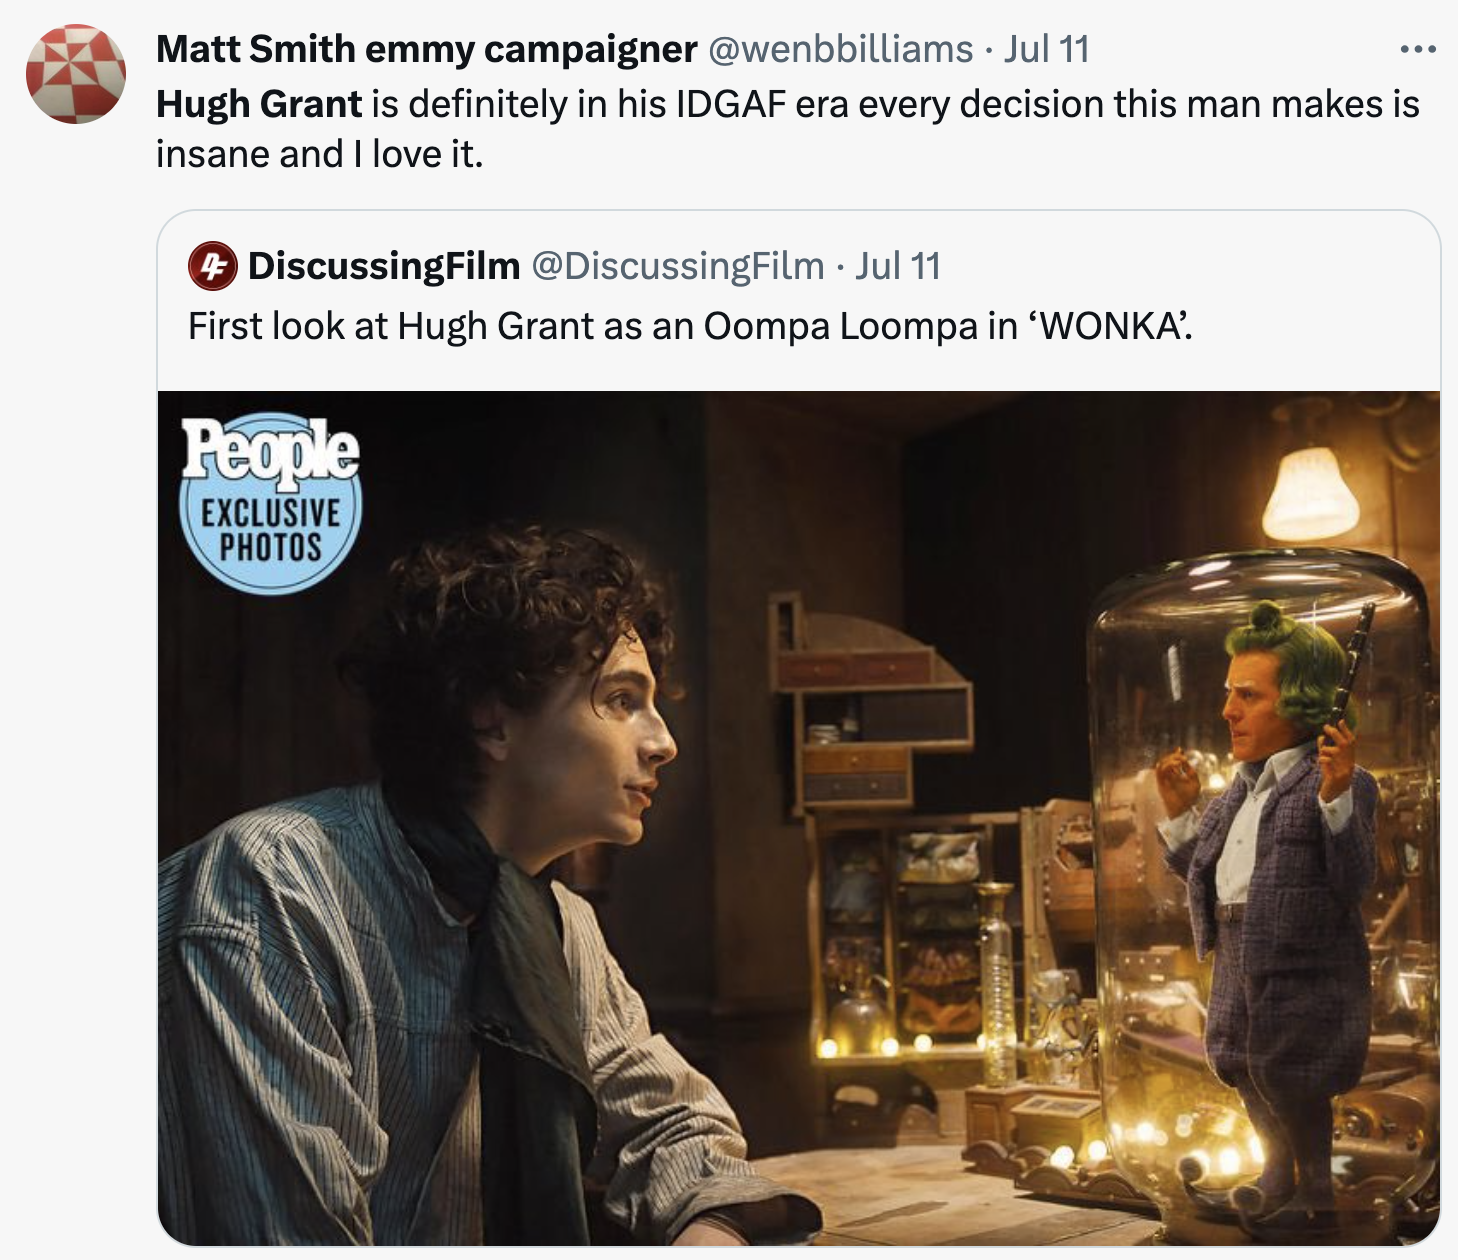 wonka memes - conversation - Matt Smith emmy campaigner Jul 11 Hugh Grant is definitely in his Idgaf era every decision this man makes is insane and I love it. DiscussingFilm Jul 11 First look at Hugh Grant as an Oompa Loompa in 'Wonka. People Exclusive P